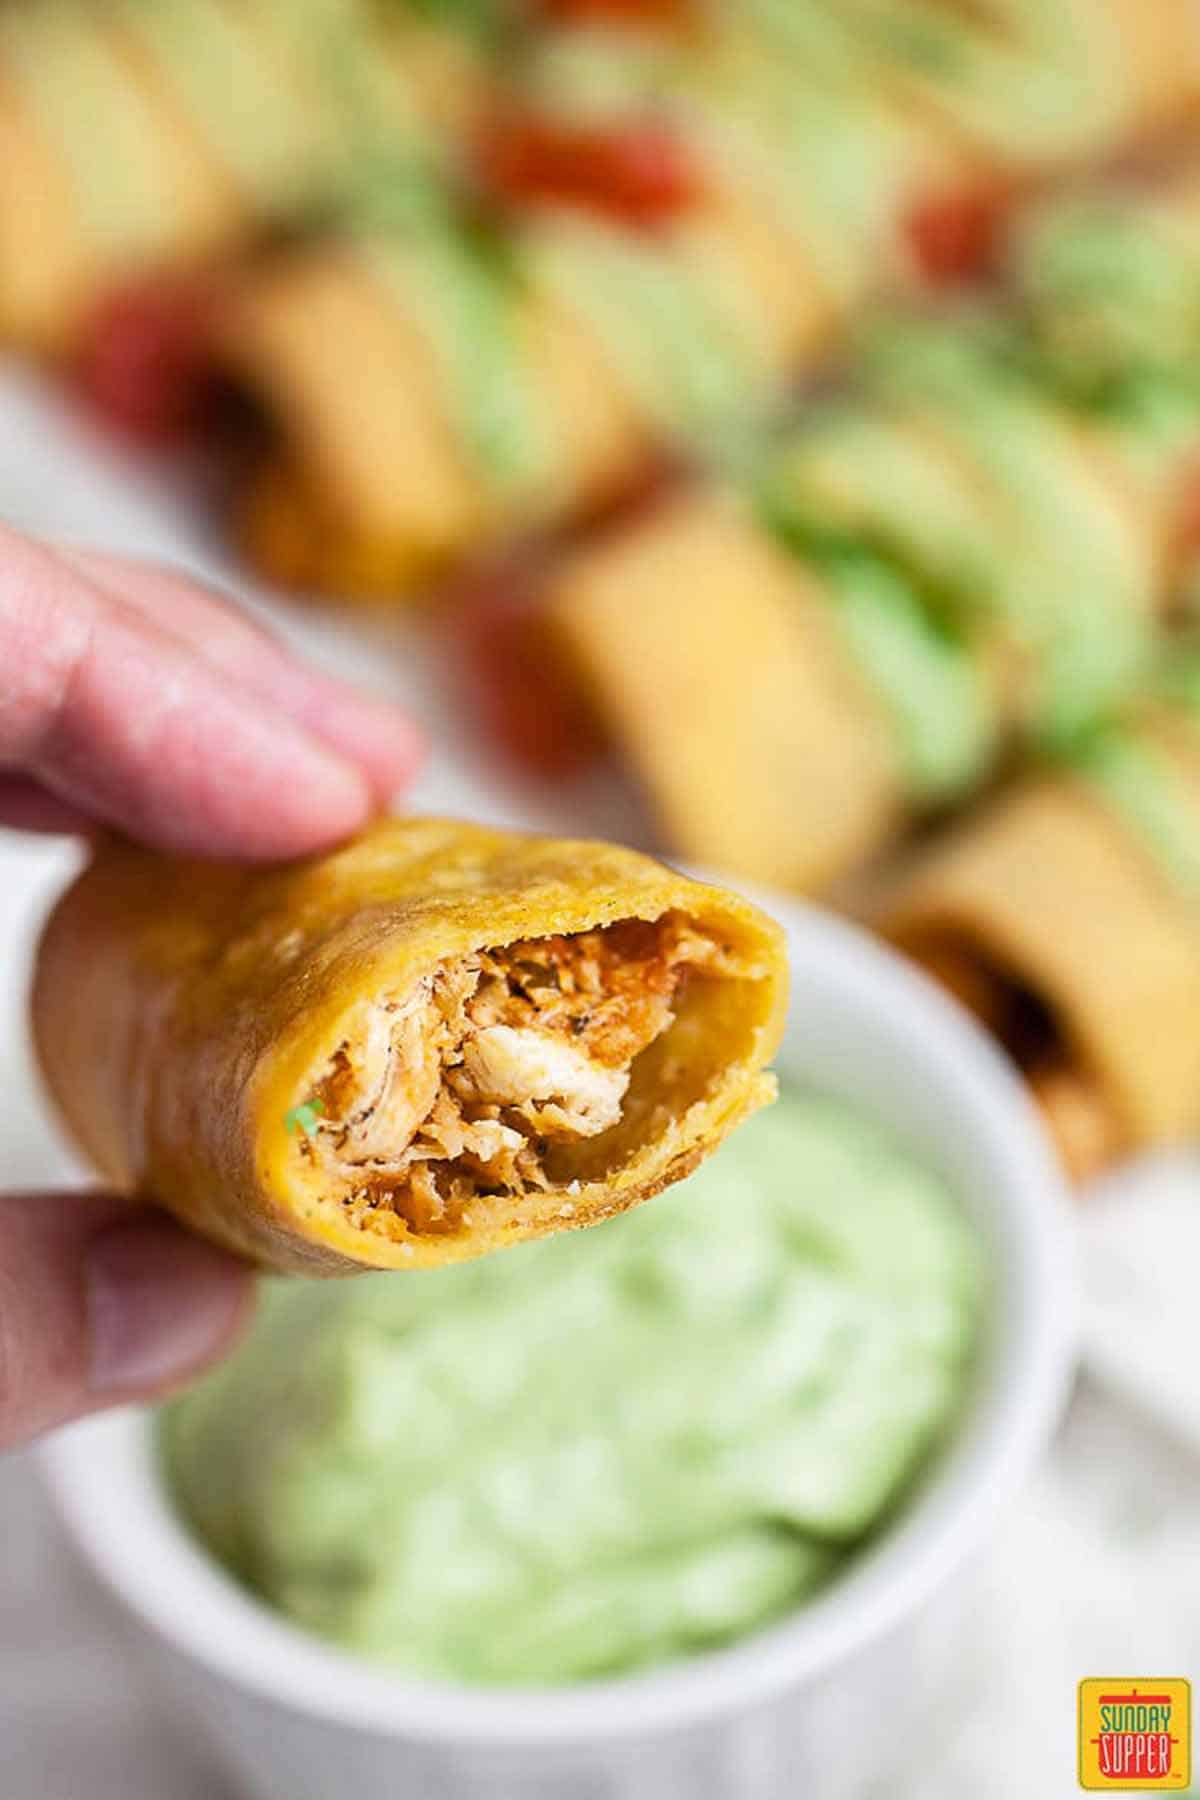 Make ahead freezer meals - Holding a chicken taquito with a bite taken out of it